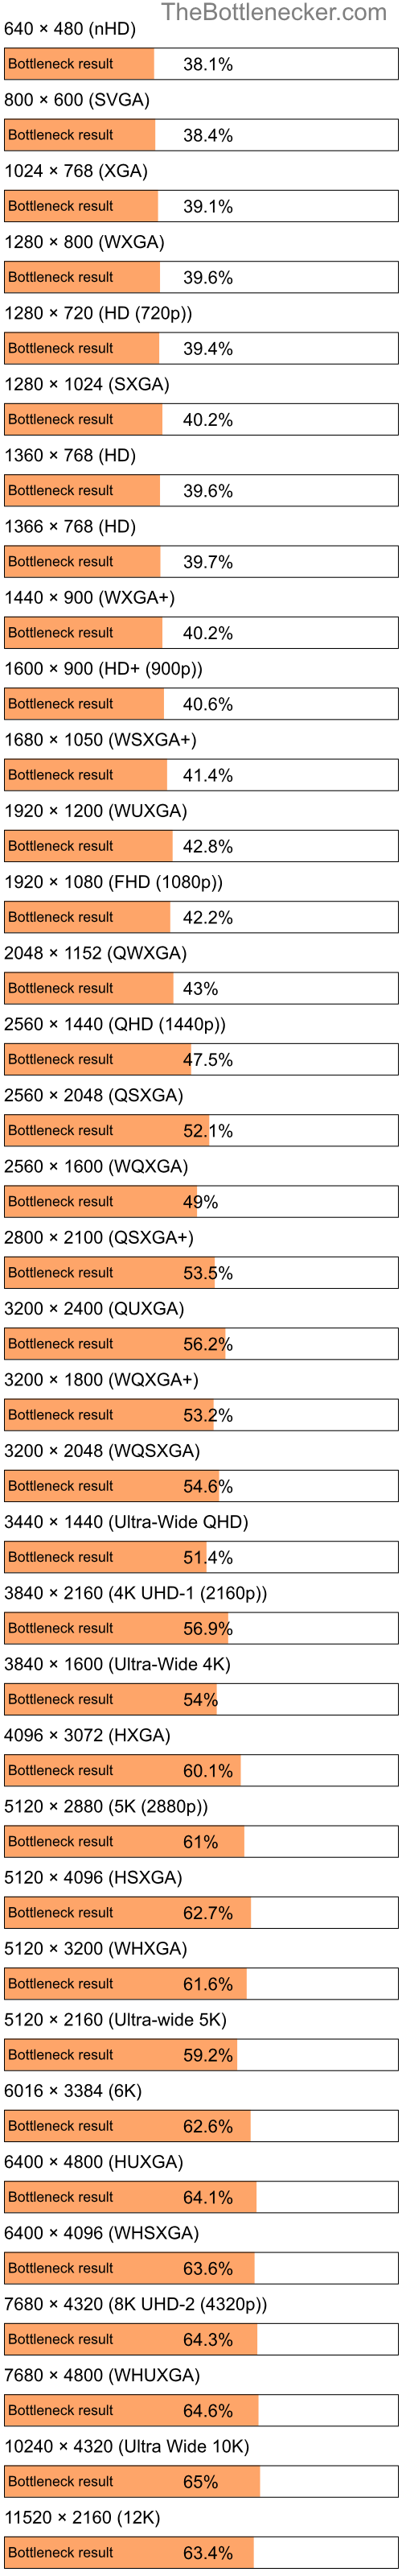 Bottleneck results by resolution for AMD Ryzen 9 5950X and NVIDIA GeForce GTX 1650 in Graphic Card Intense Tasks